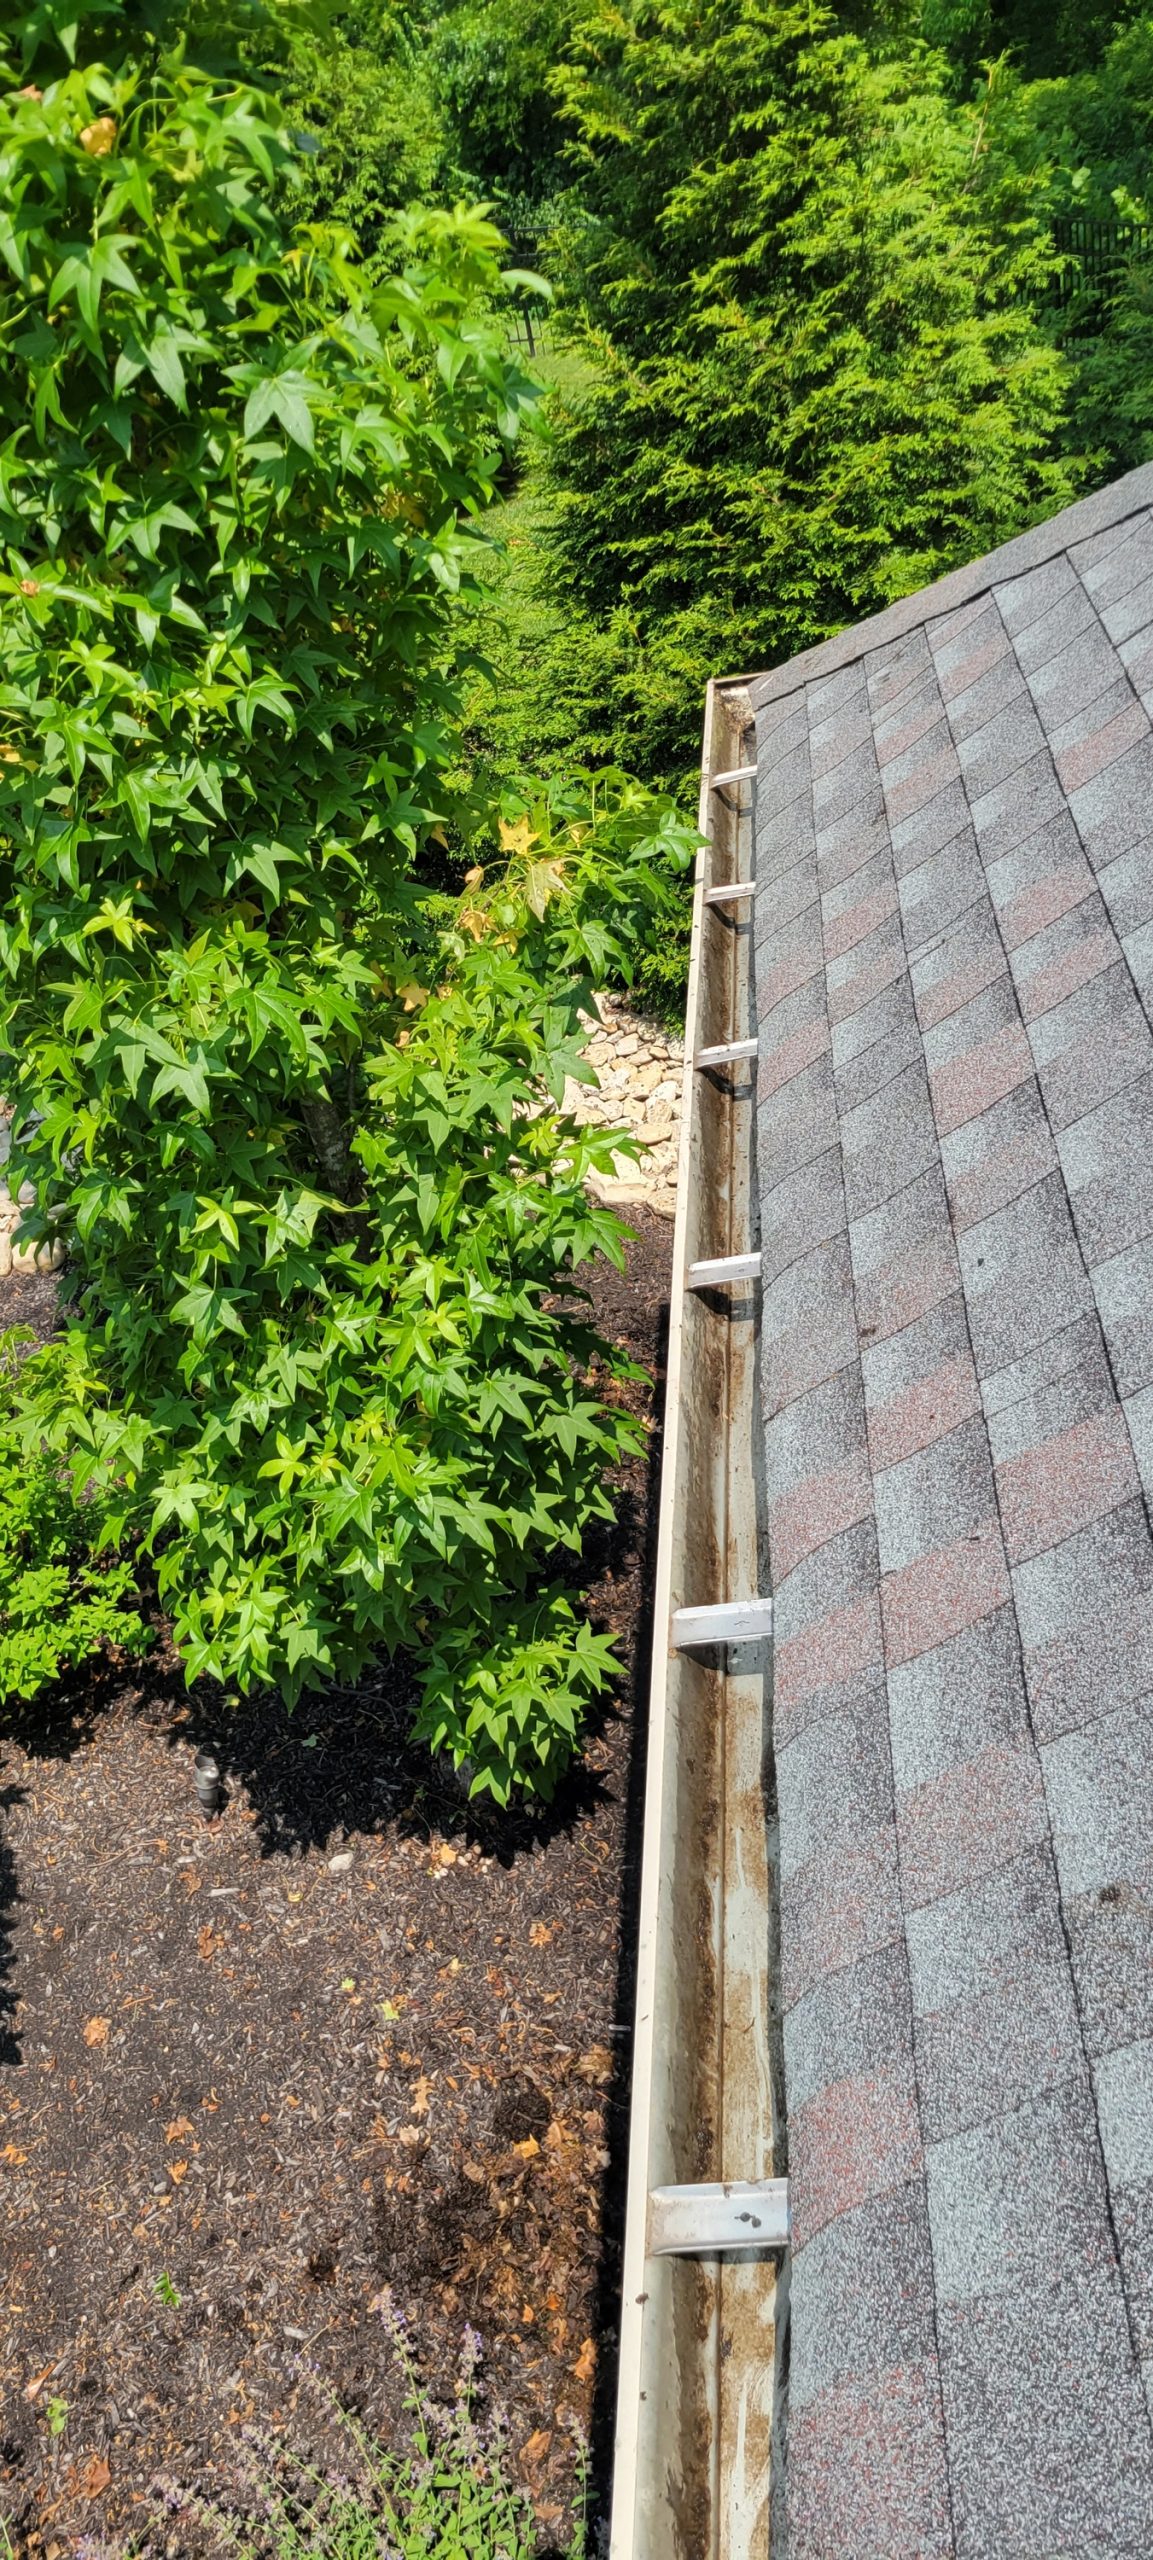 Gutter Cleaning Service in Tampa for Mayra's Home